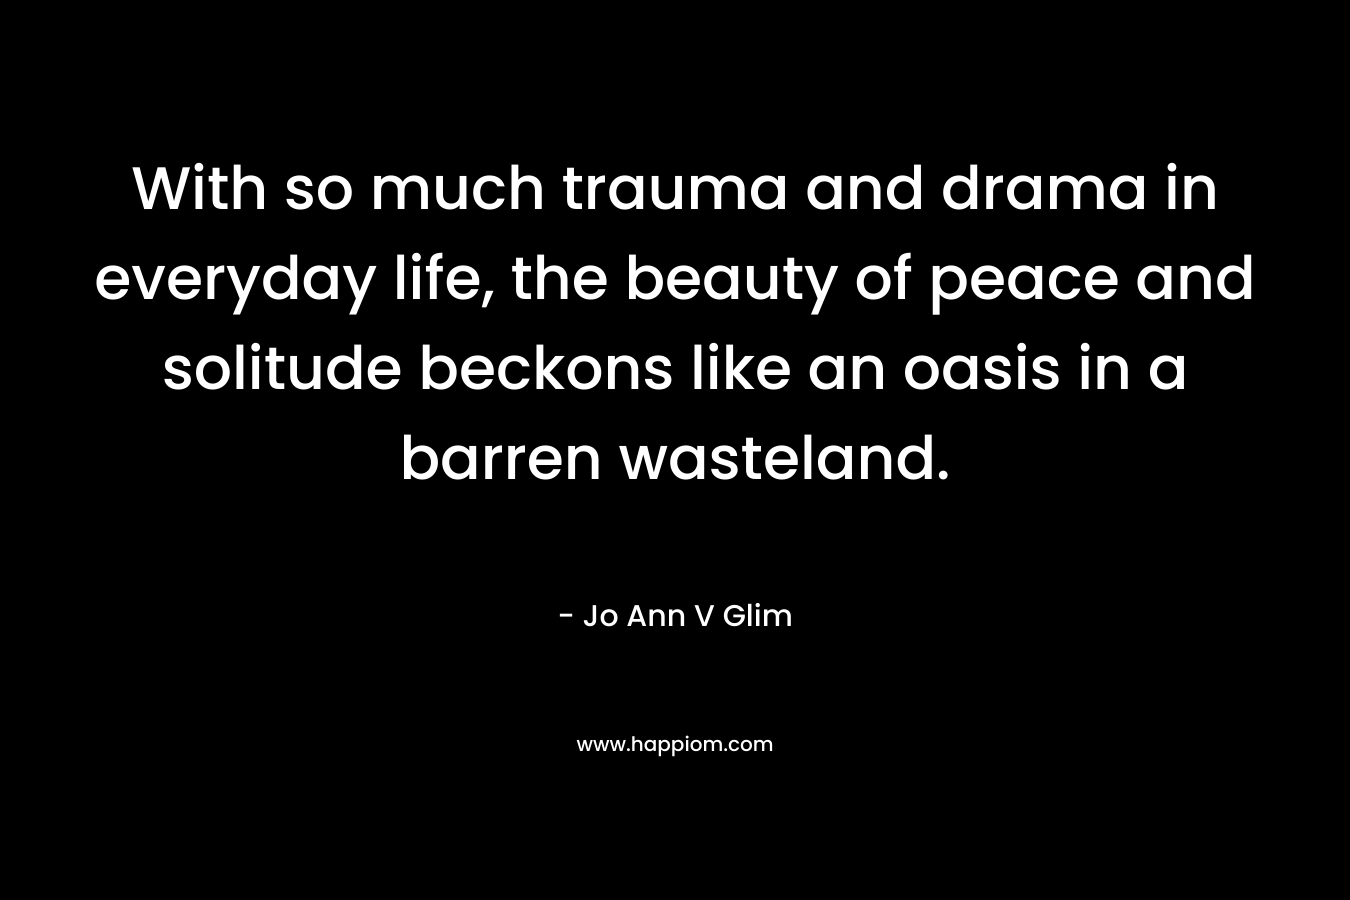 With so much trauma and drama in everyday life, the beauty of peace and solitude beckons like an oasis in a barren wasteland. – Jo Ann V Glim